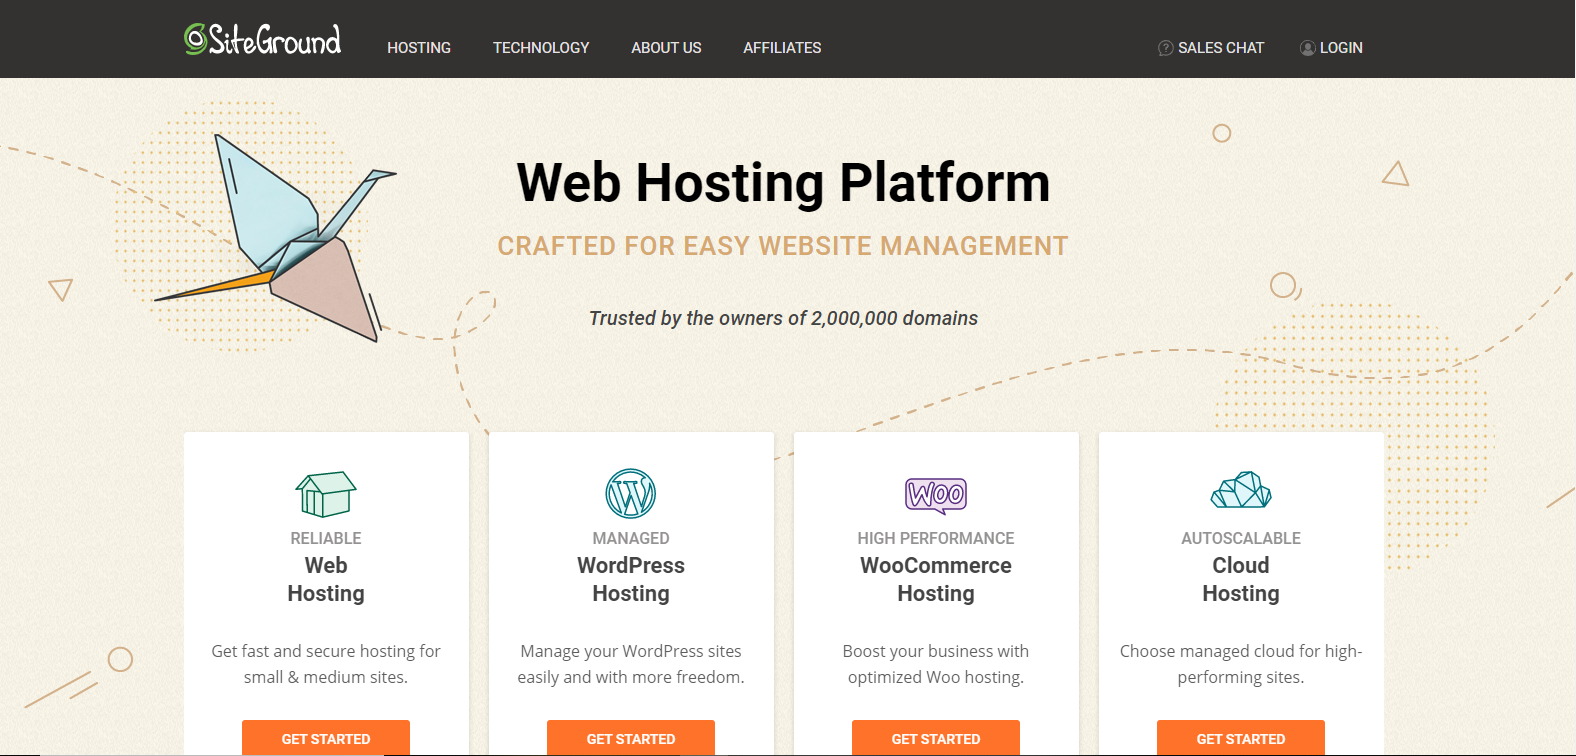 The Best 10 Web Hosting Providers For Your Small Business - Image 2